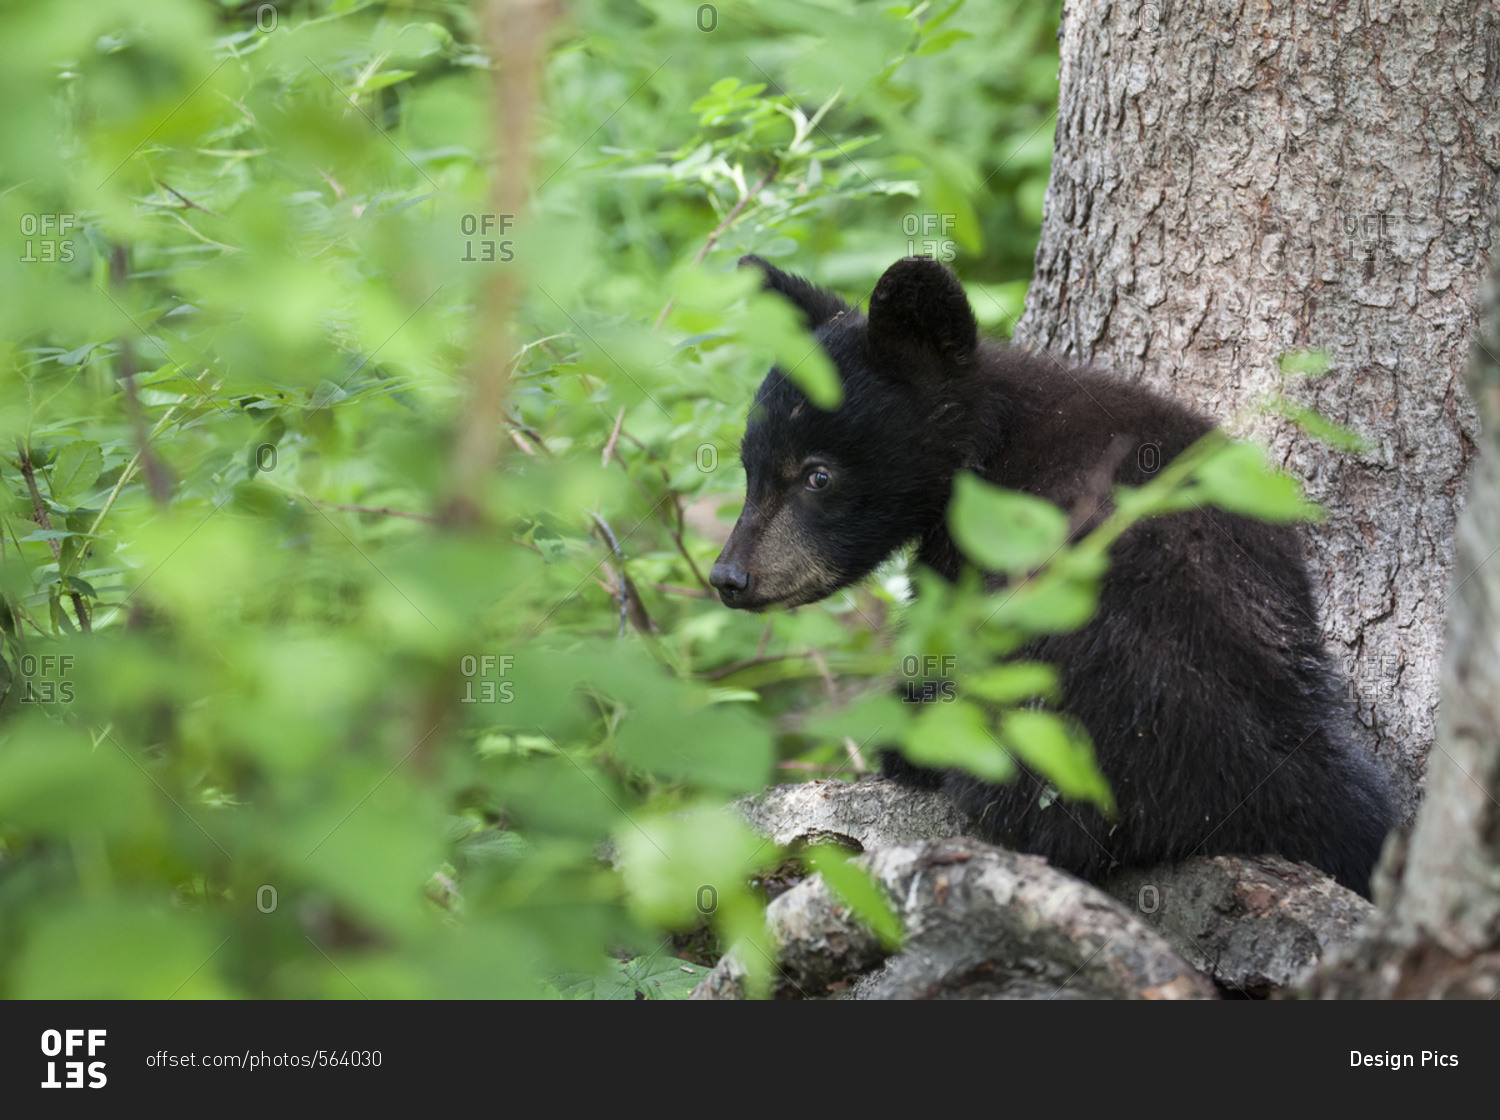 Black bear (Ursus americanus) cub looking out through the lush foliage from a tree branch, South-central Alaska, Alaska, United States of America